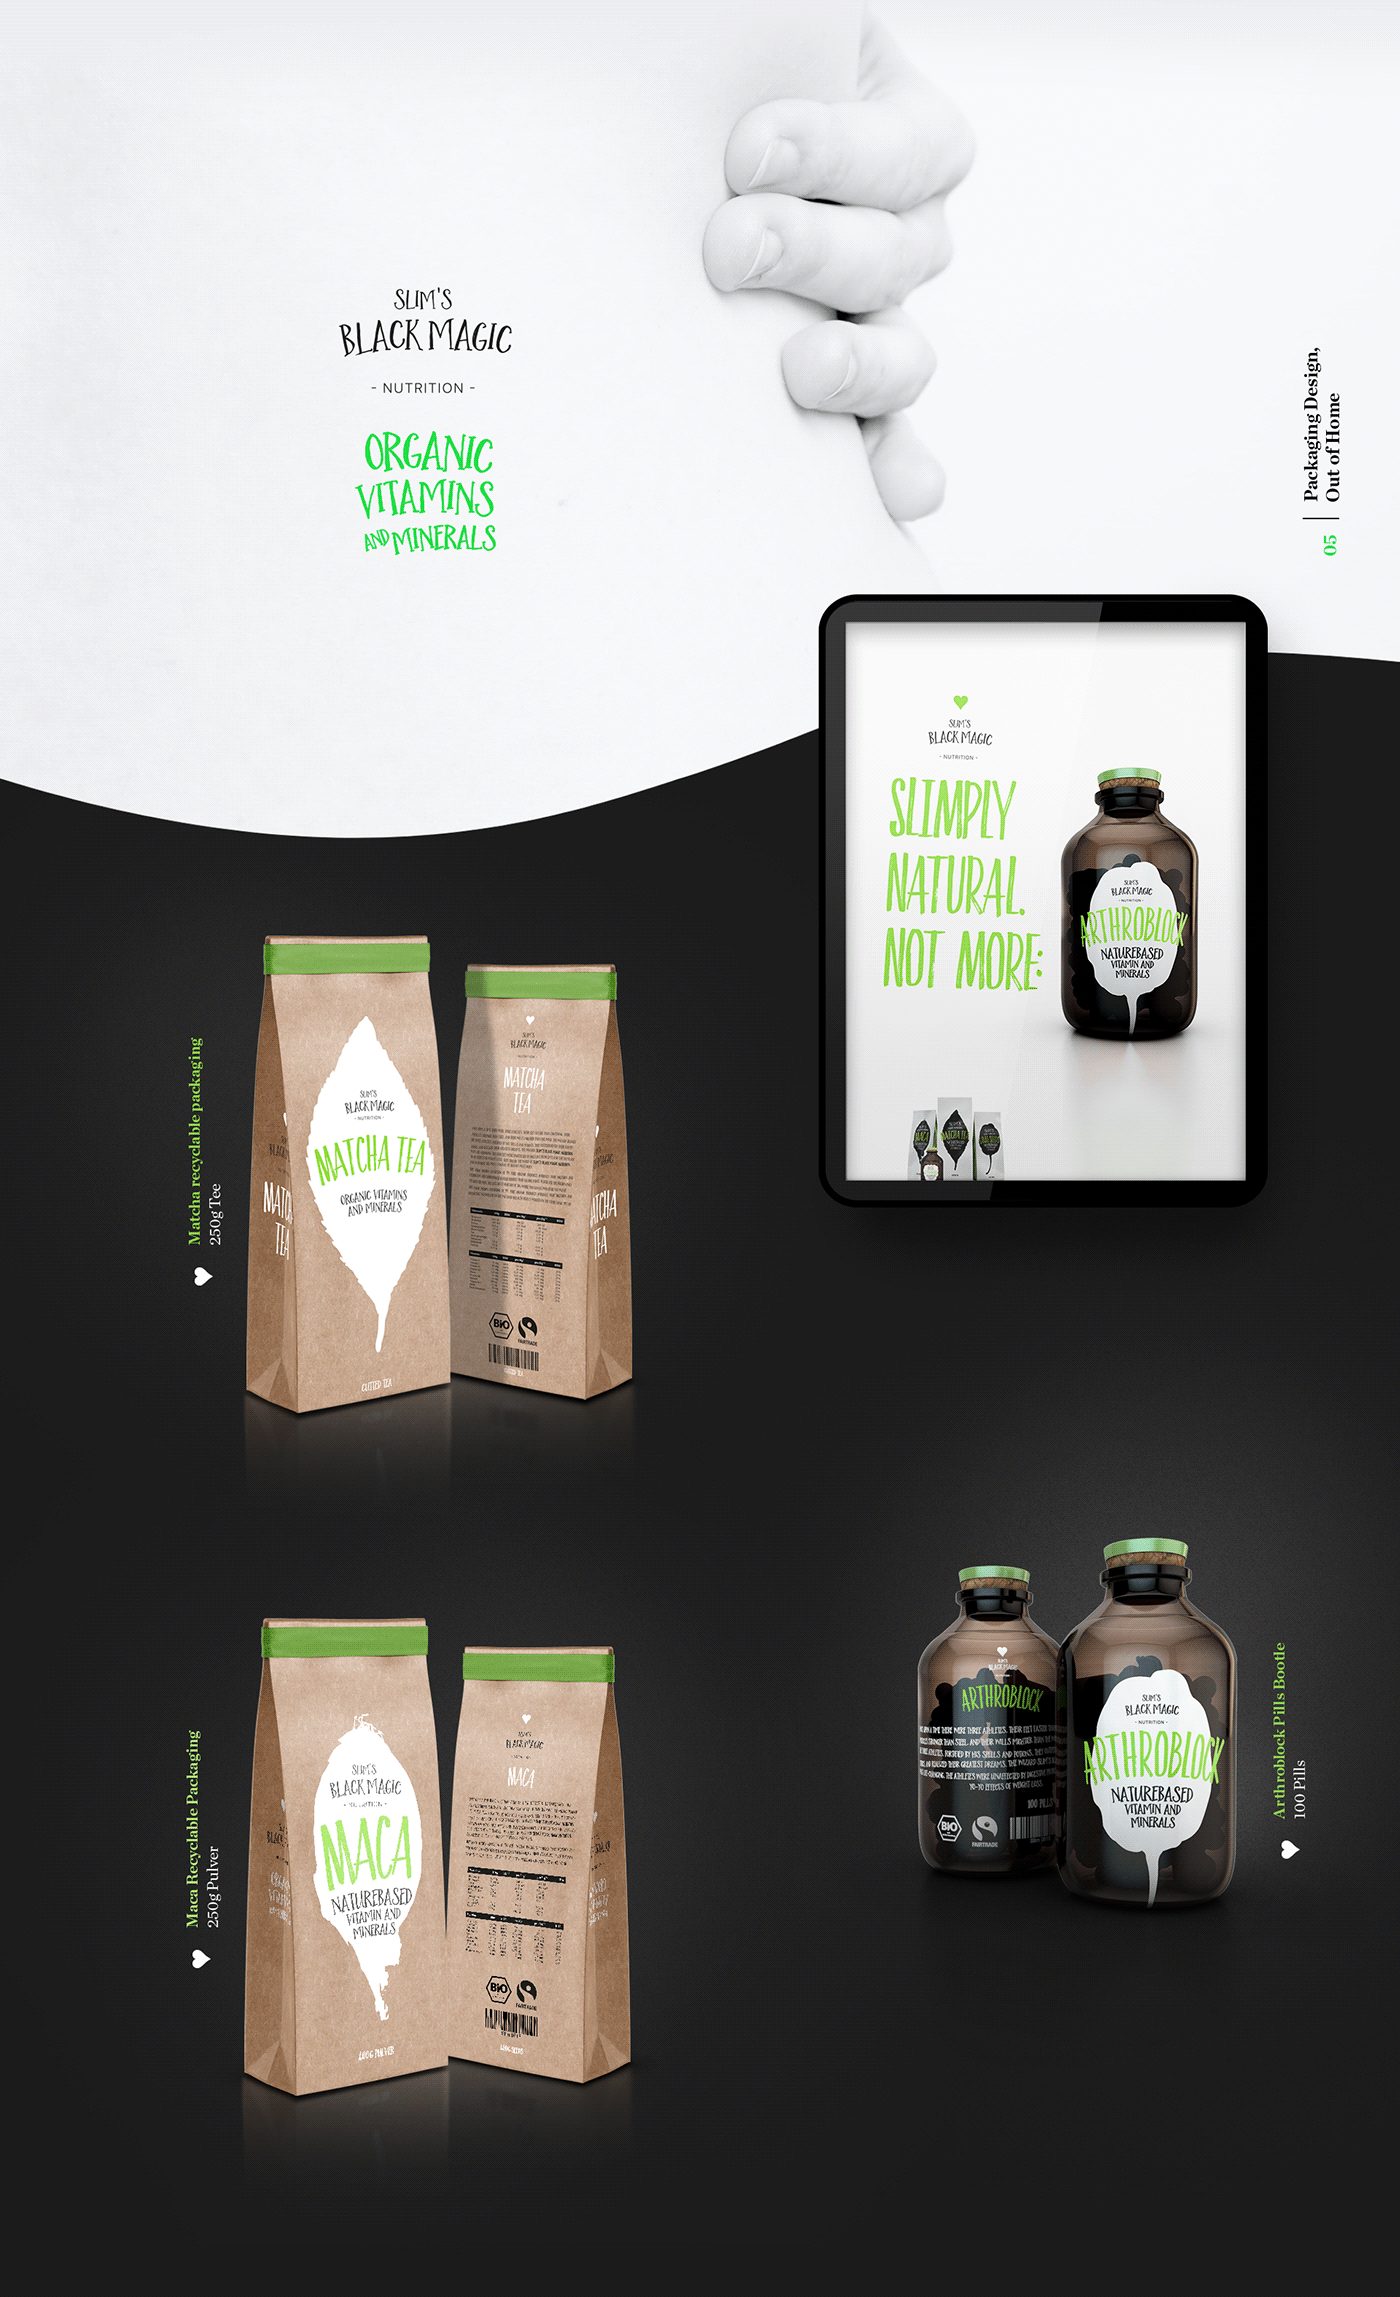 Advertising  campaign Food  Health nutrition Packaging shape branding  design identity